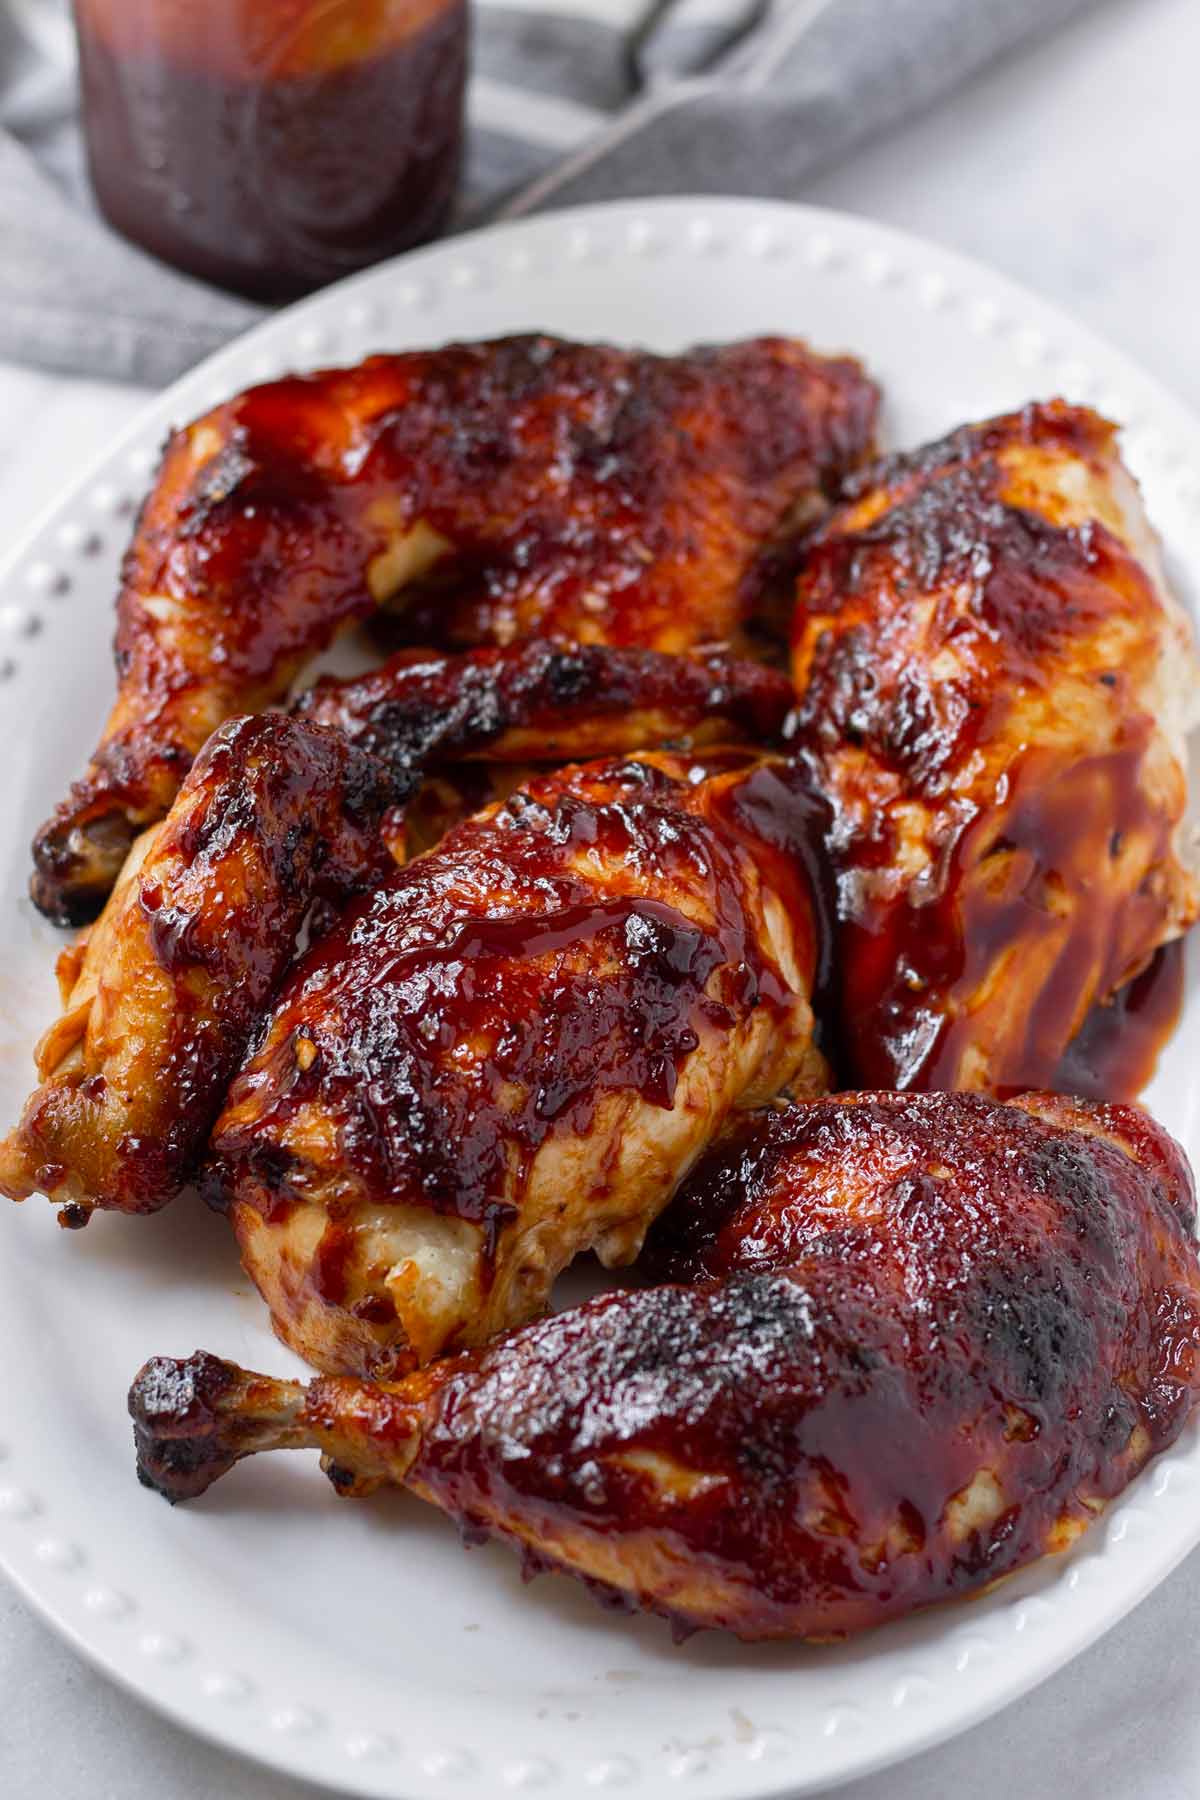 bbq sauce brushed on roasted chicken